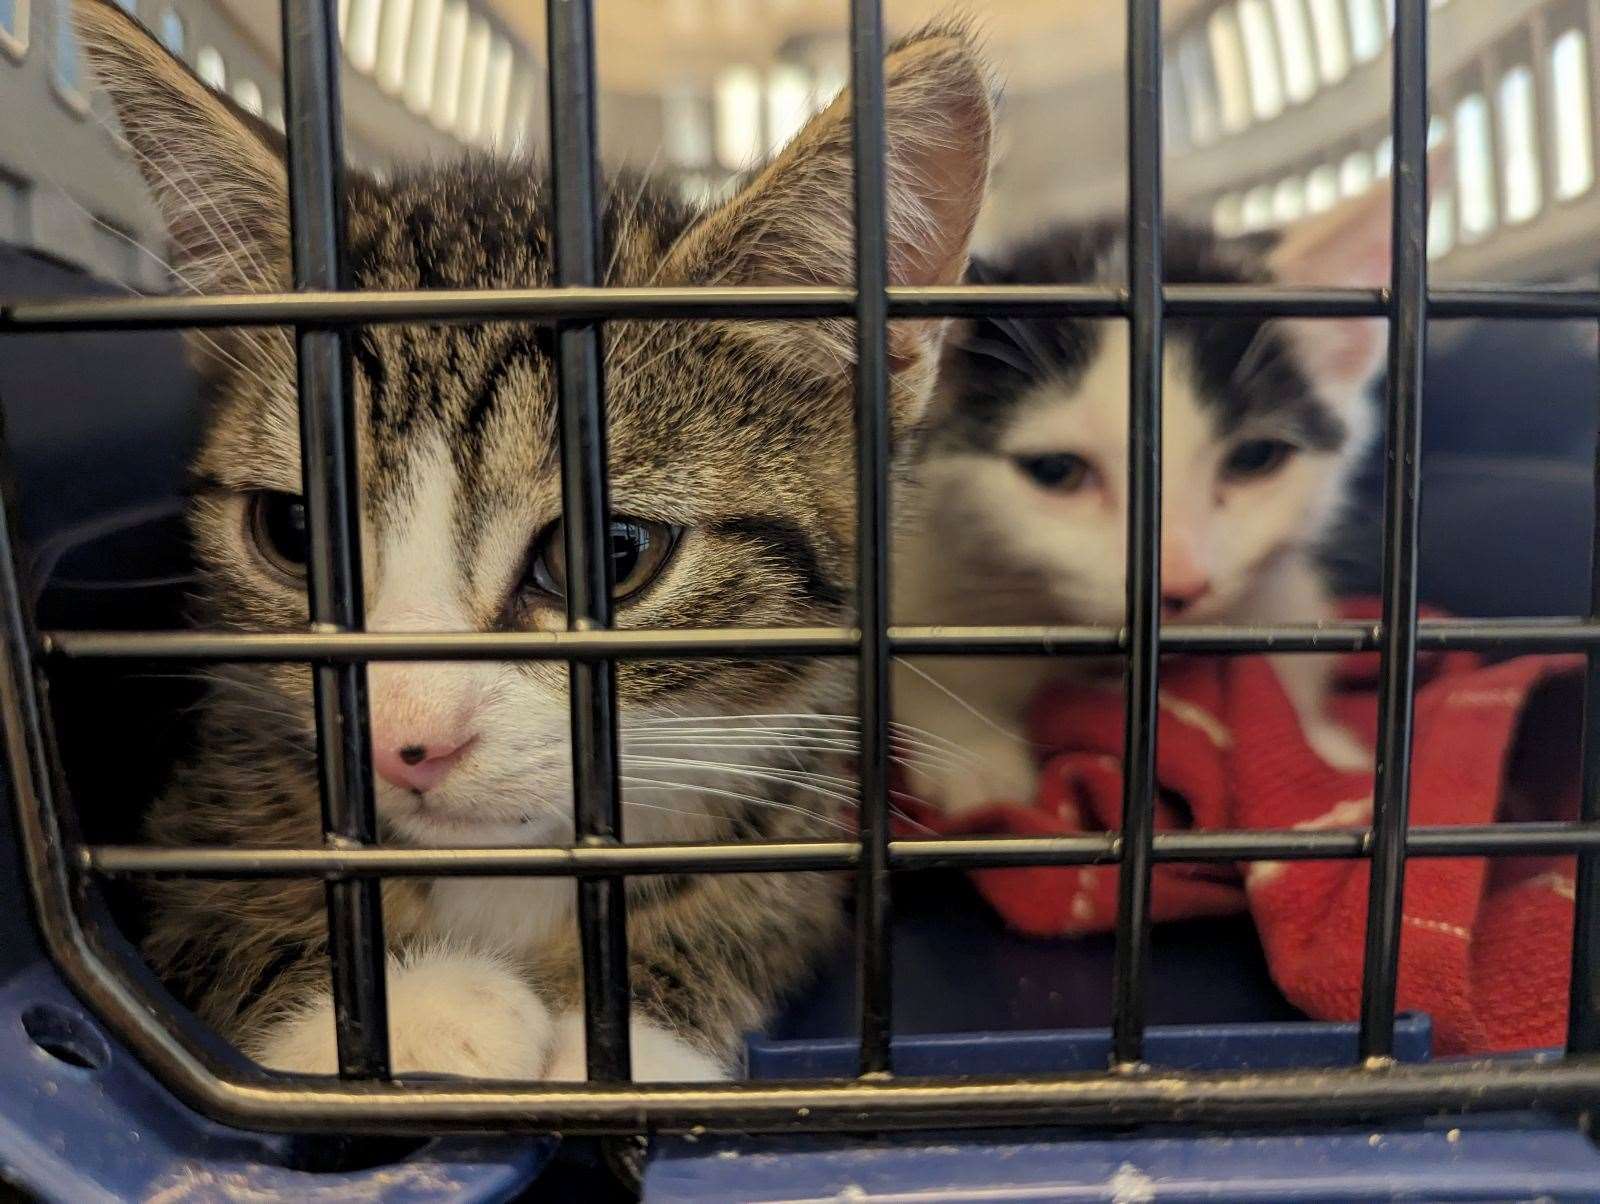 Two kittens were also found before being rescued. Picture: RSPCA